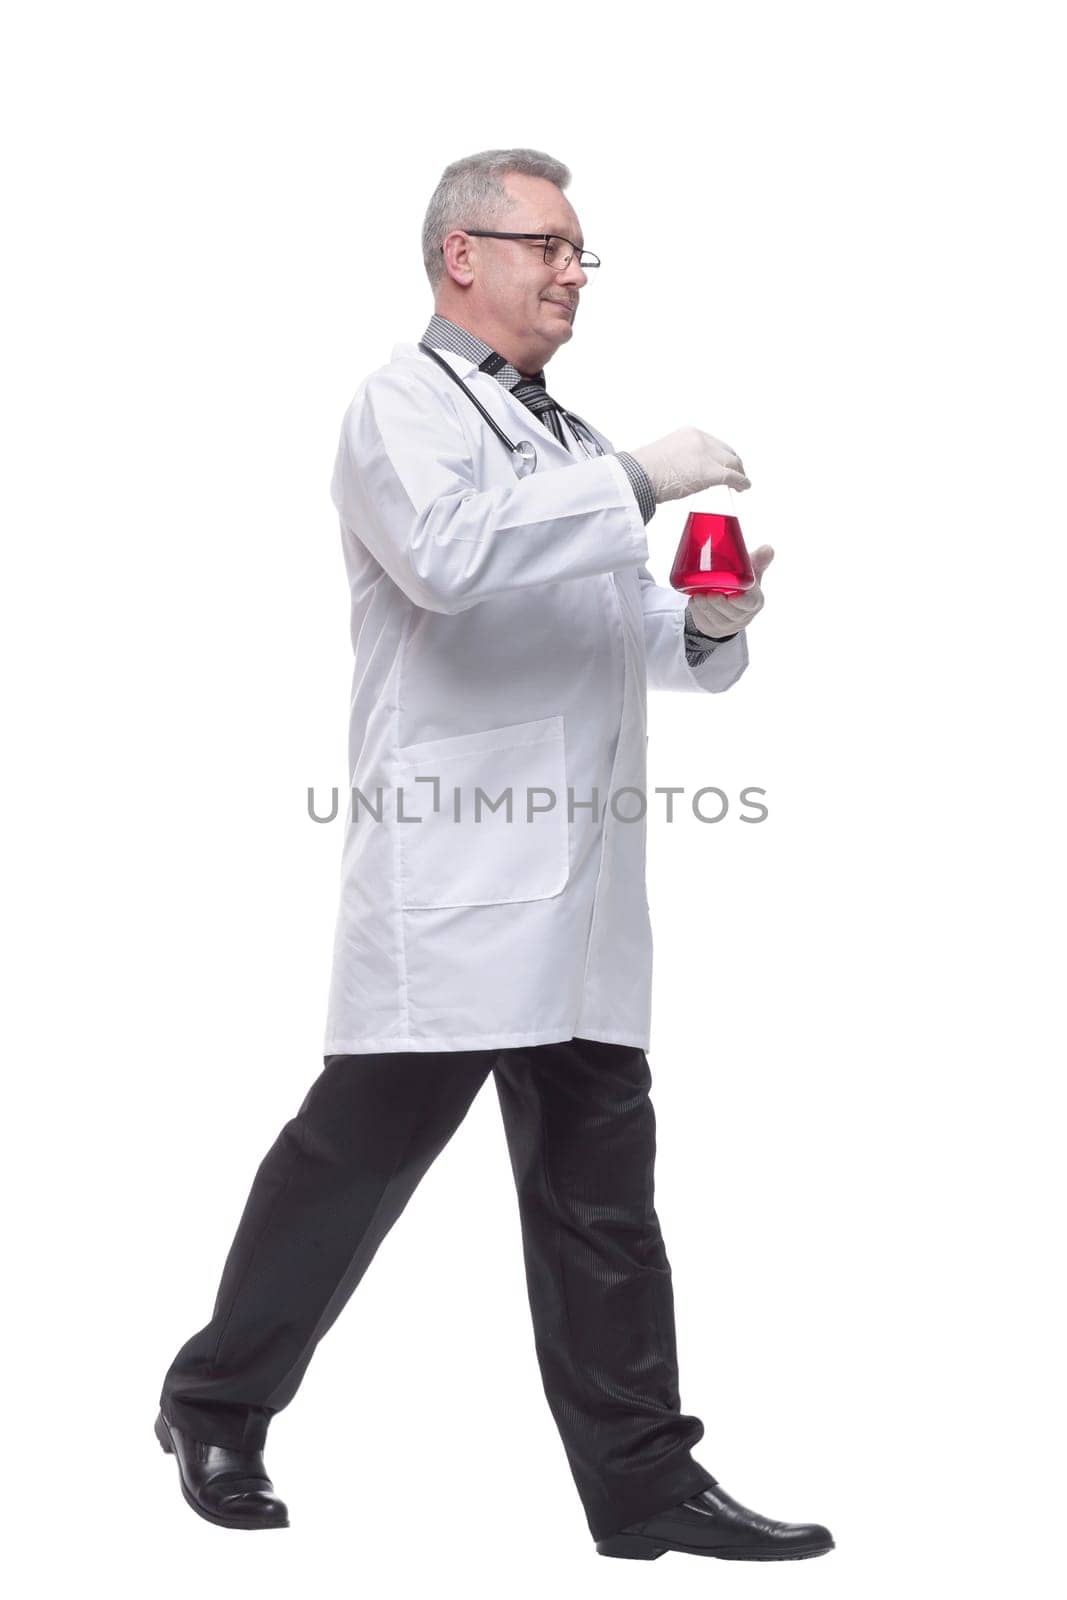 Doctor, the man shows an liquid. Consept of medic, beaker, biology, chemistry, control, workwear. Isolate on a white background by asdf